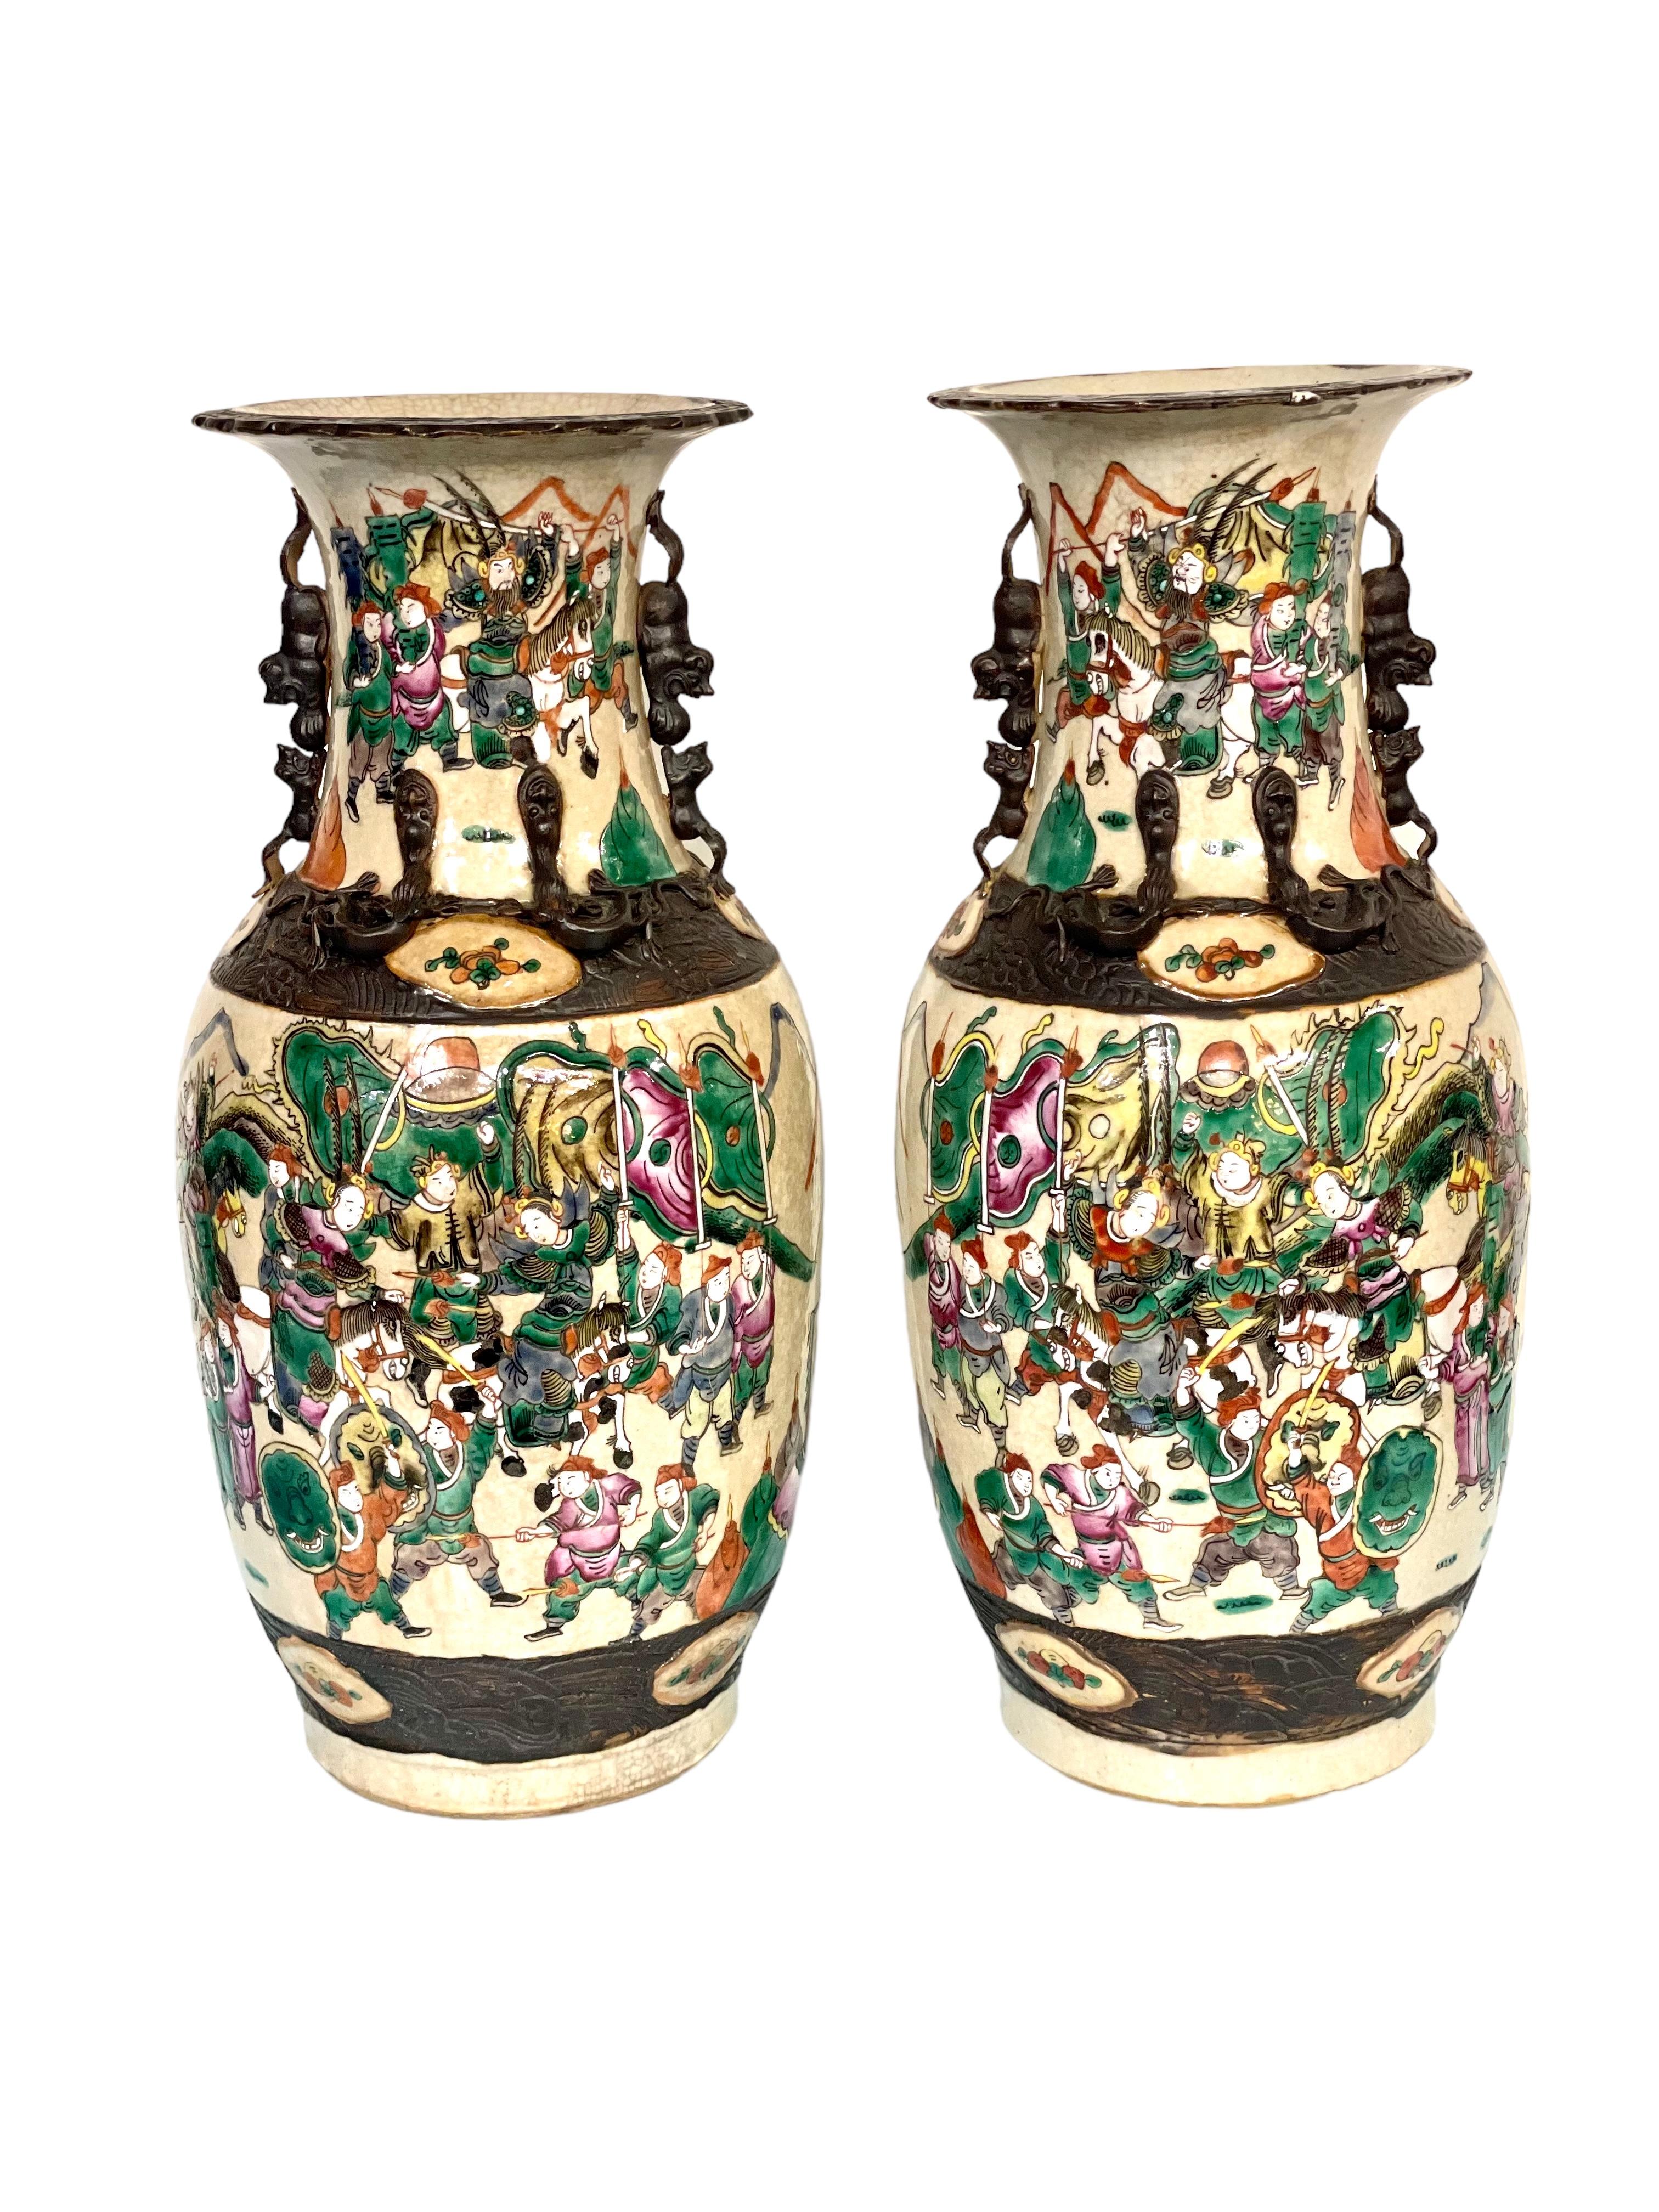 A superb pair of large and elegant Chinese 'Nanjing' porcelain baluster vases, each intricately decorated with an encircling battle scene of warriors on foot and on horseback on its lower half. Dating from the 19th century, these statuesque crackle